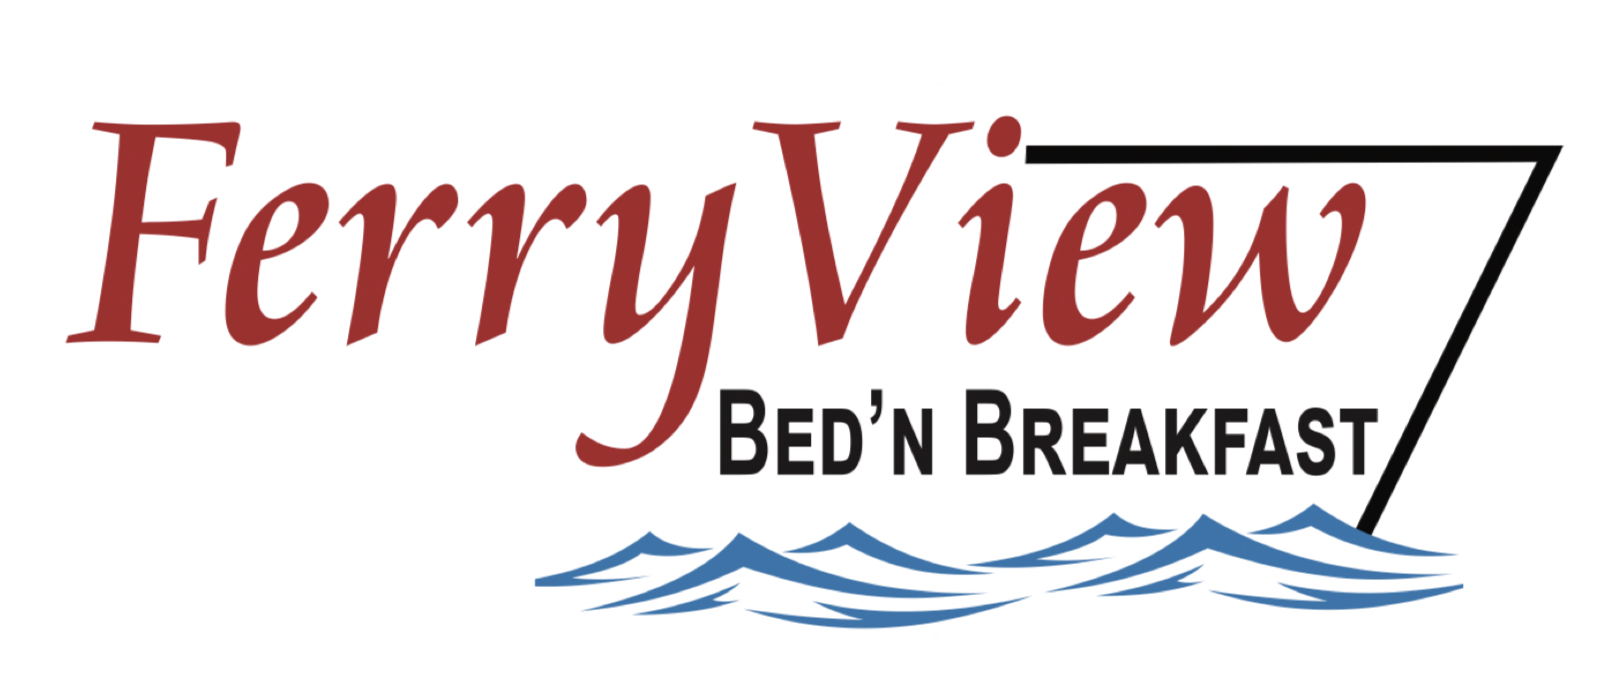 Ferryview Bed and Breakfast